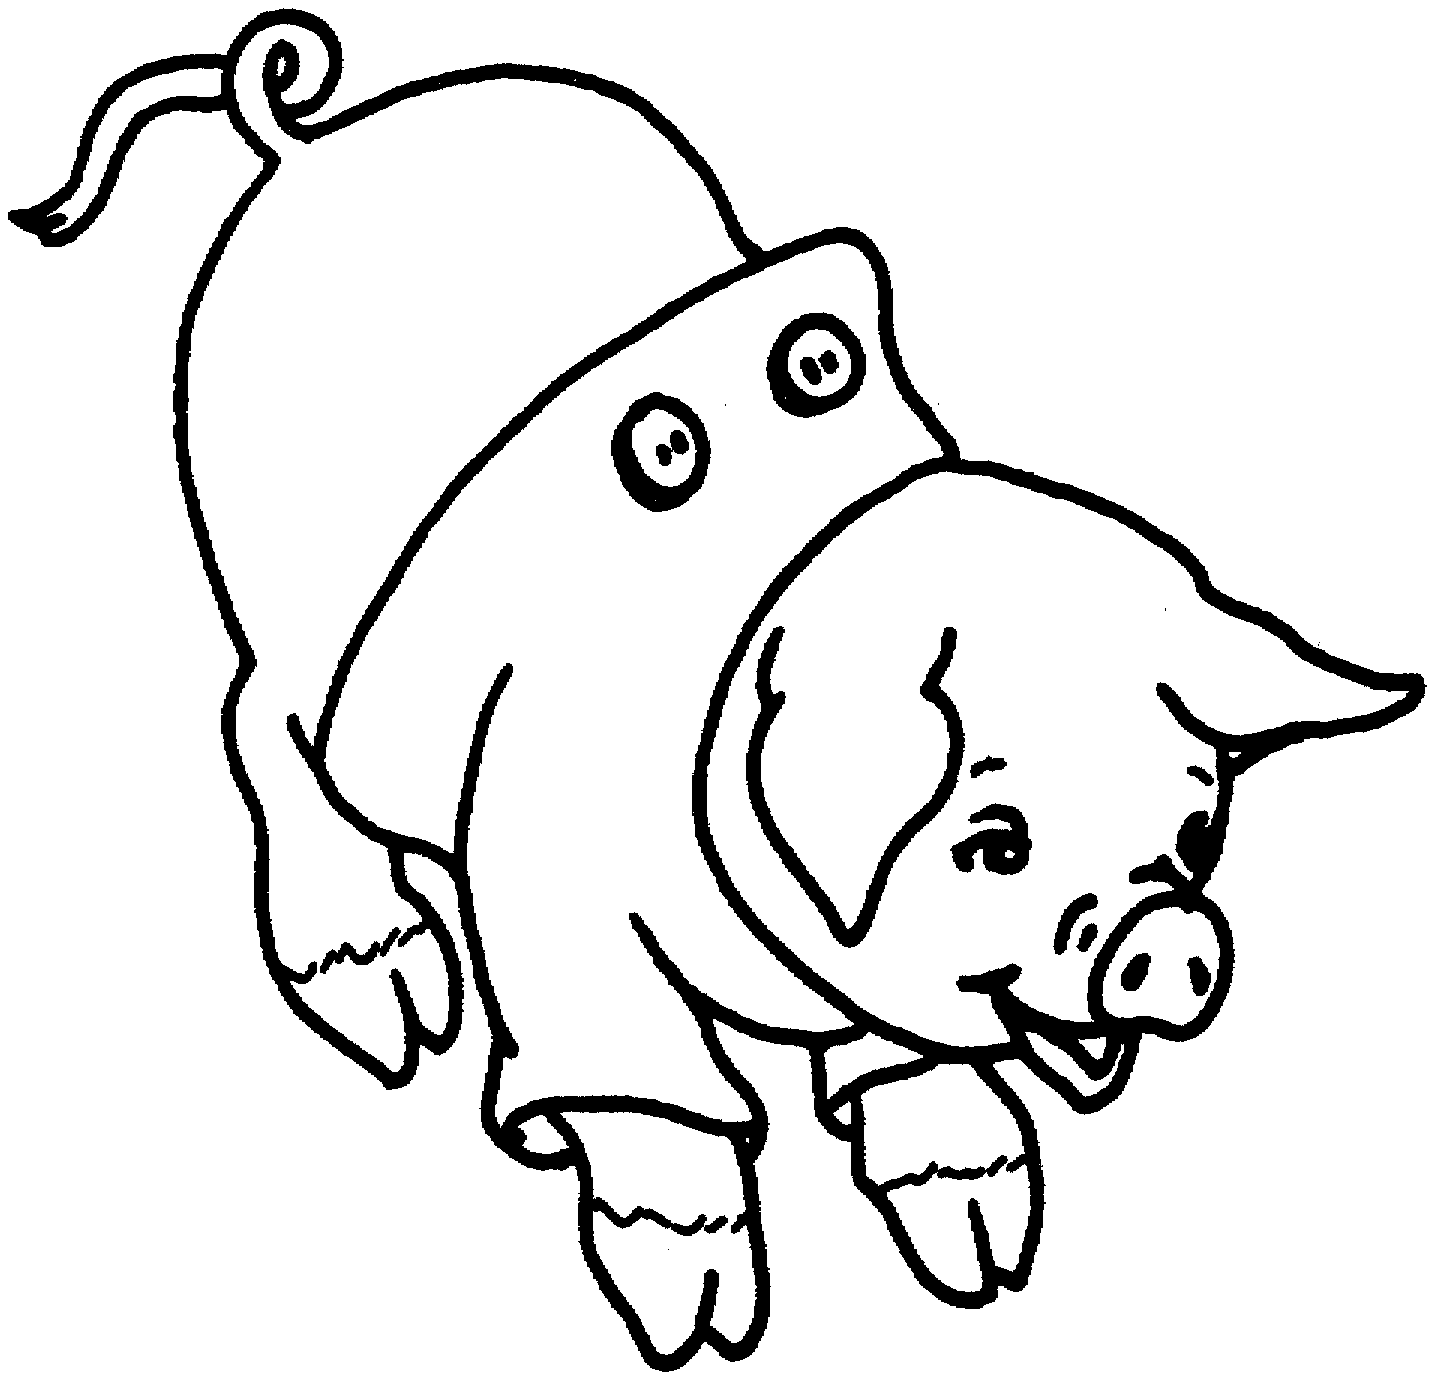 pig to colour cute piglet pig in a teacup coloring page rubber stamp pig to colour 